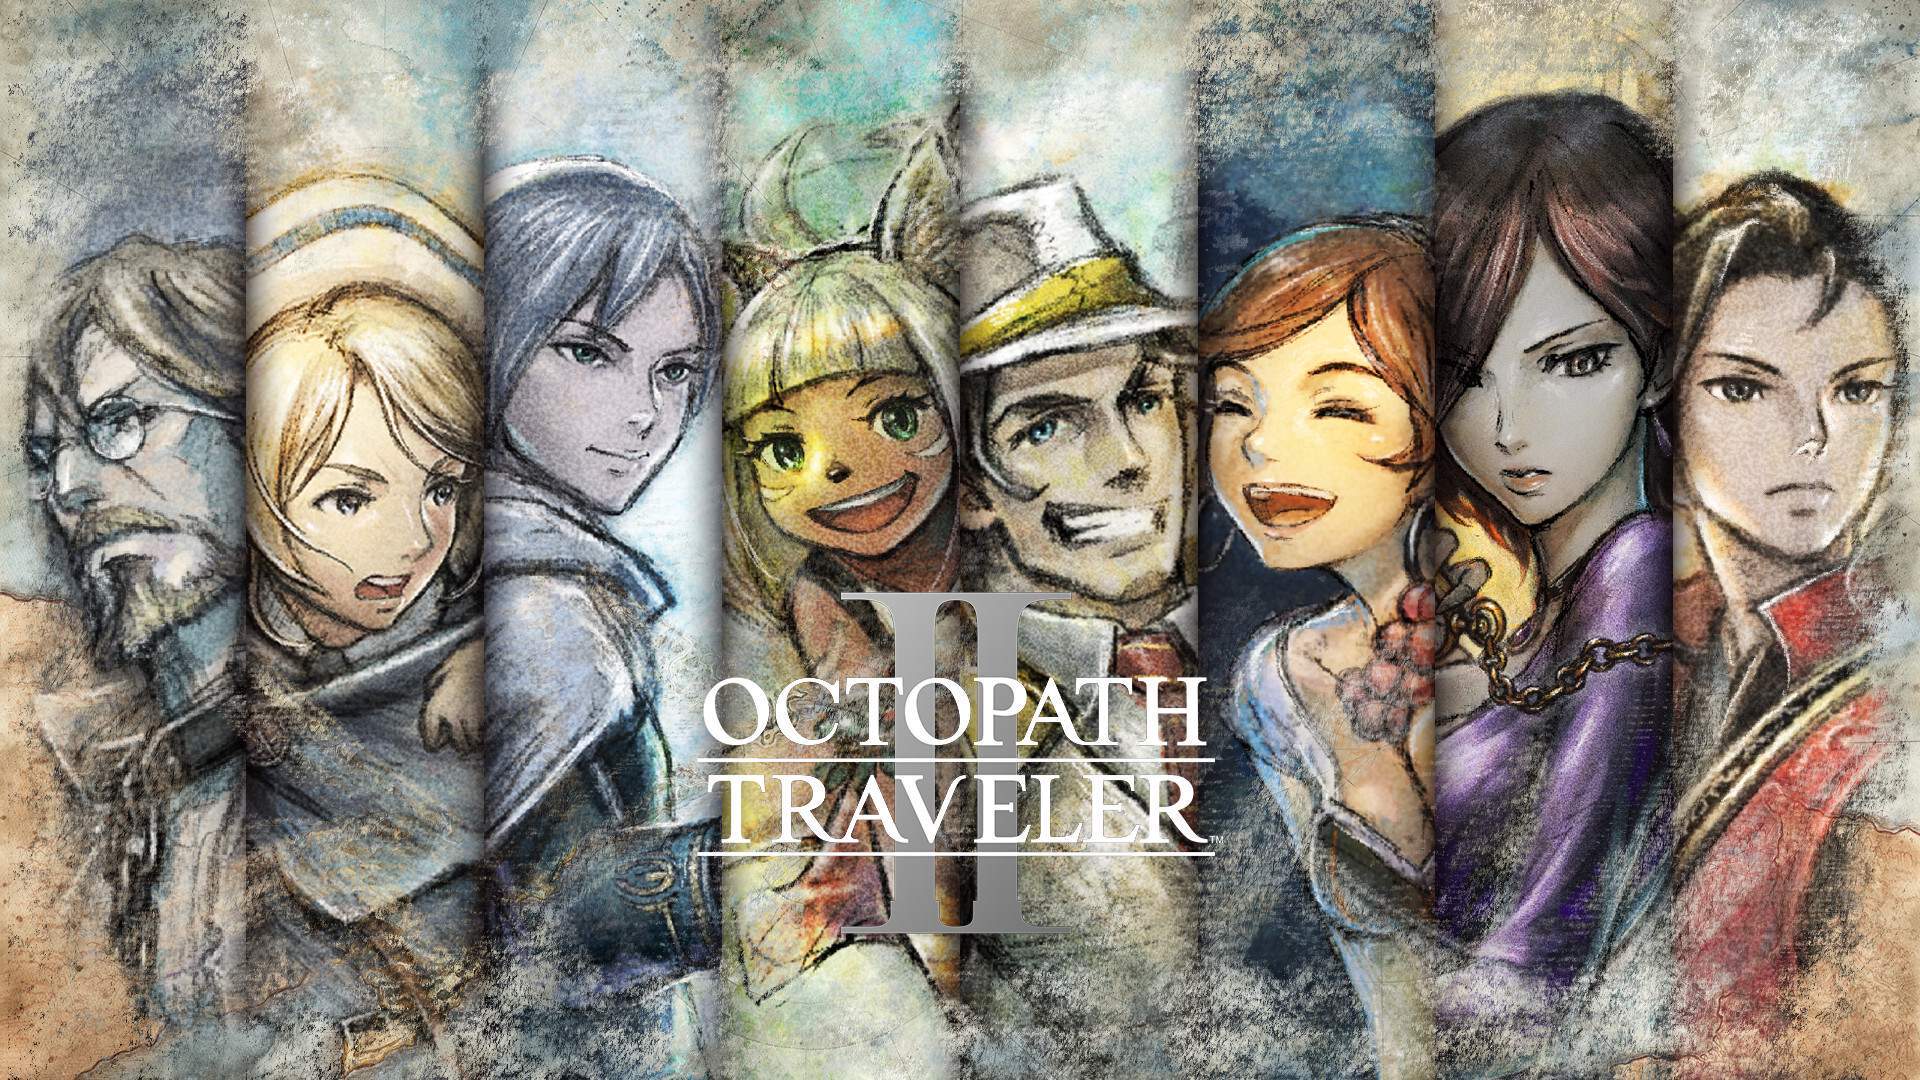 Who To Start With in Octopath Traveler 2 - Octopath Traveler II Guide - IGN